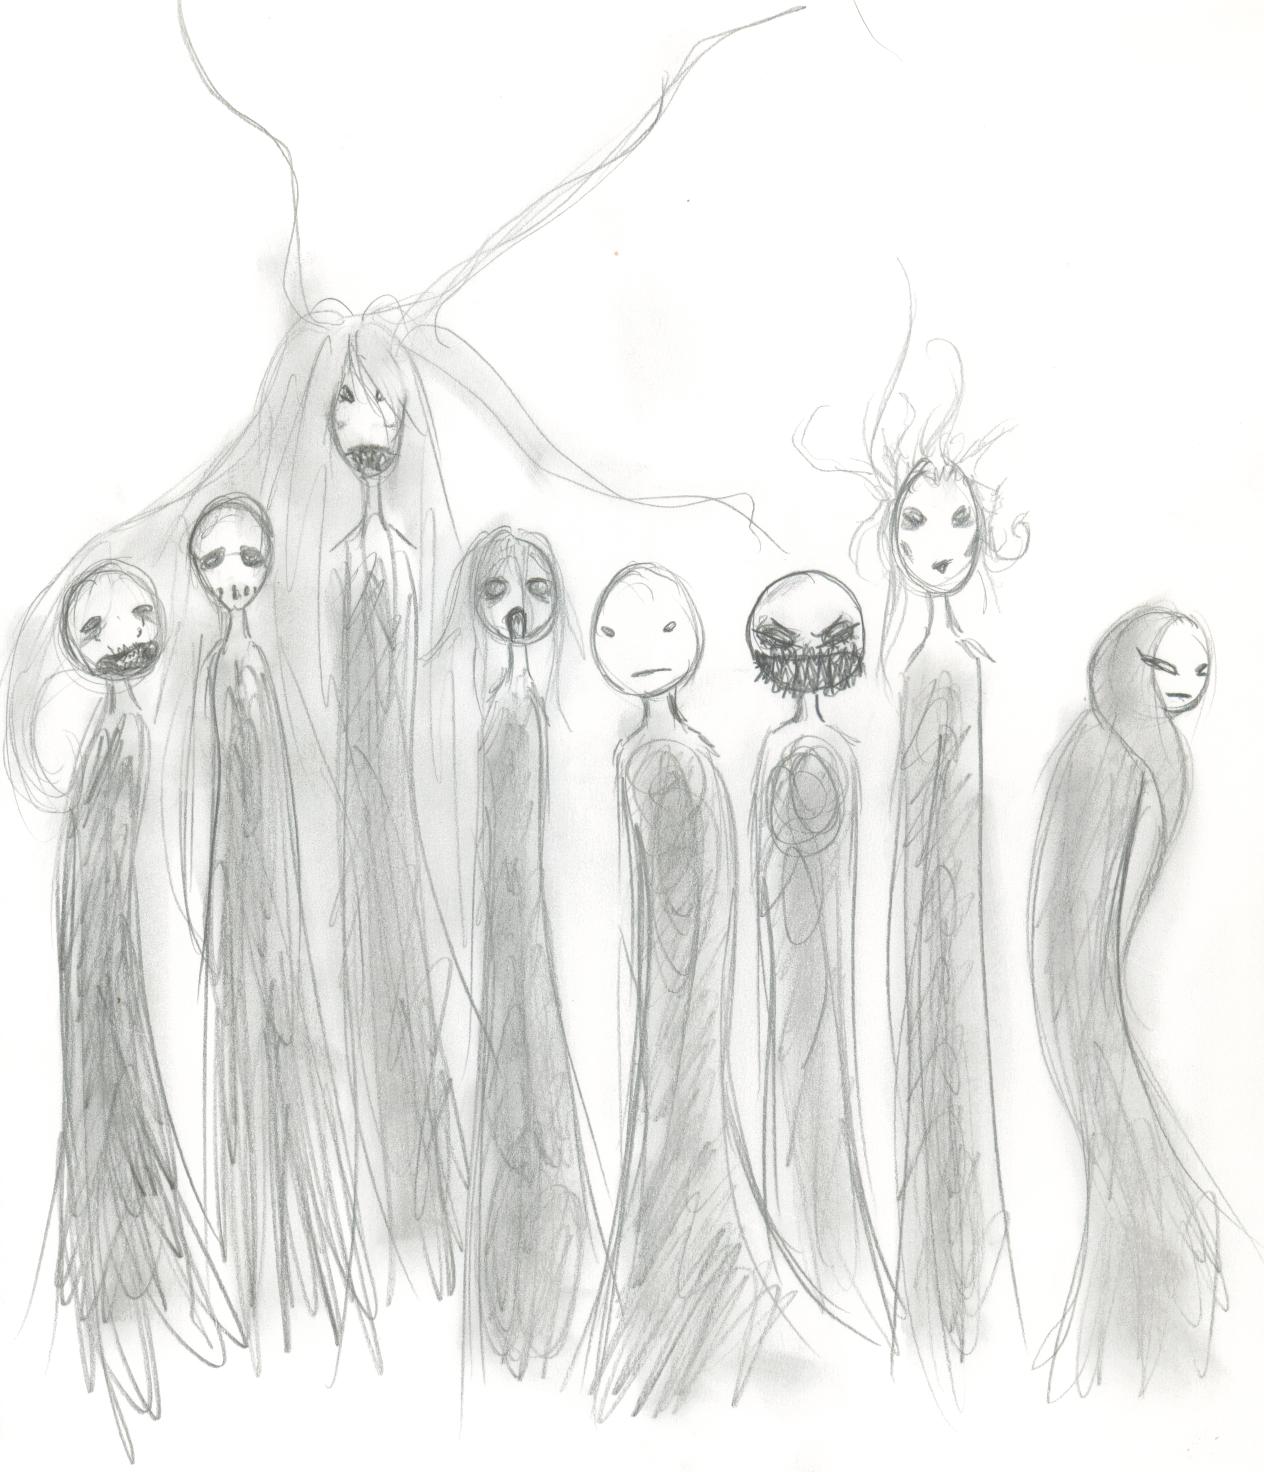 The Shadow People by Emily_the_Strange